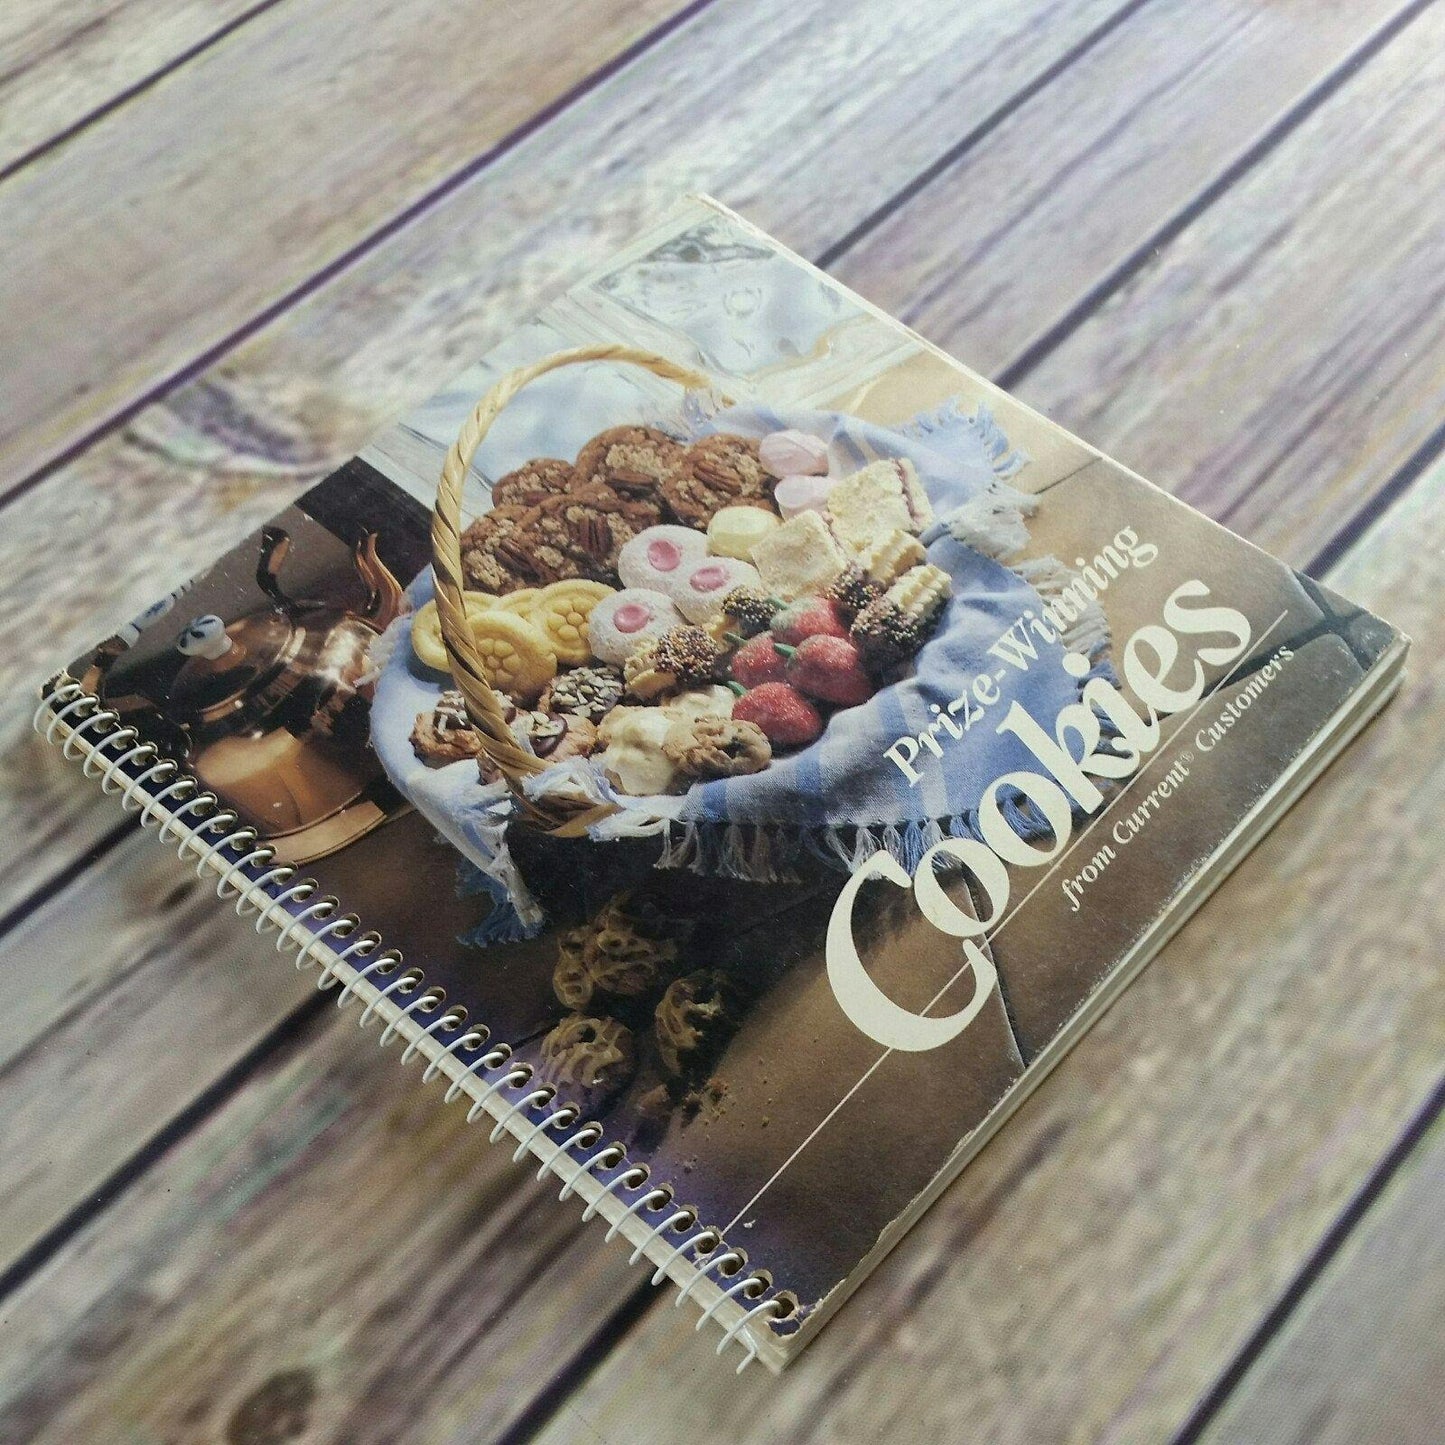 Vintage Cookie Cookbook Prize Winning Cookies Recipes from Current Customers 1990 Spiral Bound